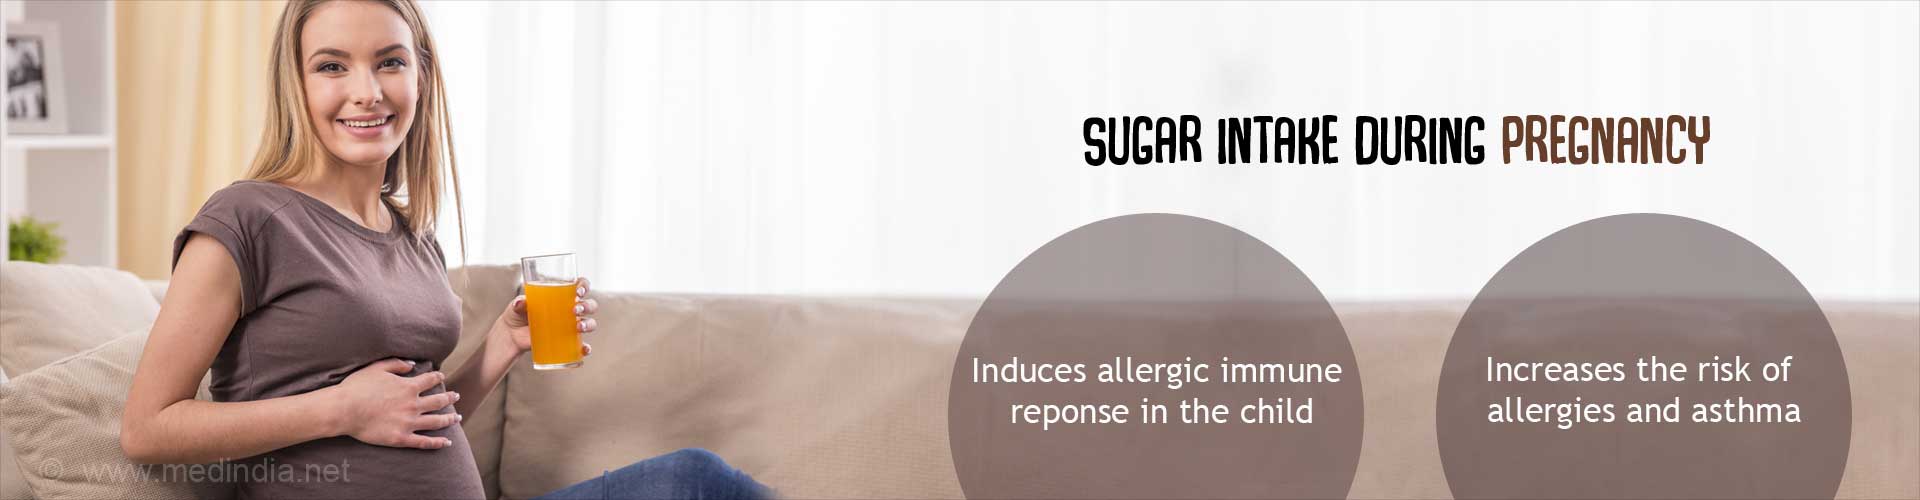 Sugar Intake During Pregnancy
- Induces allergic immune response in the child
- Increases the risk of allergies and asthma